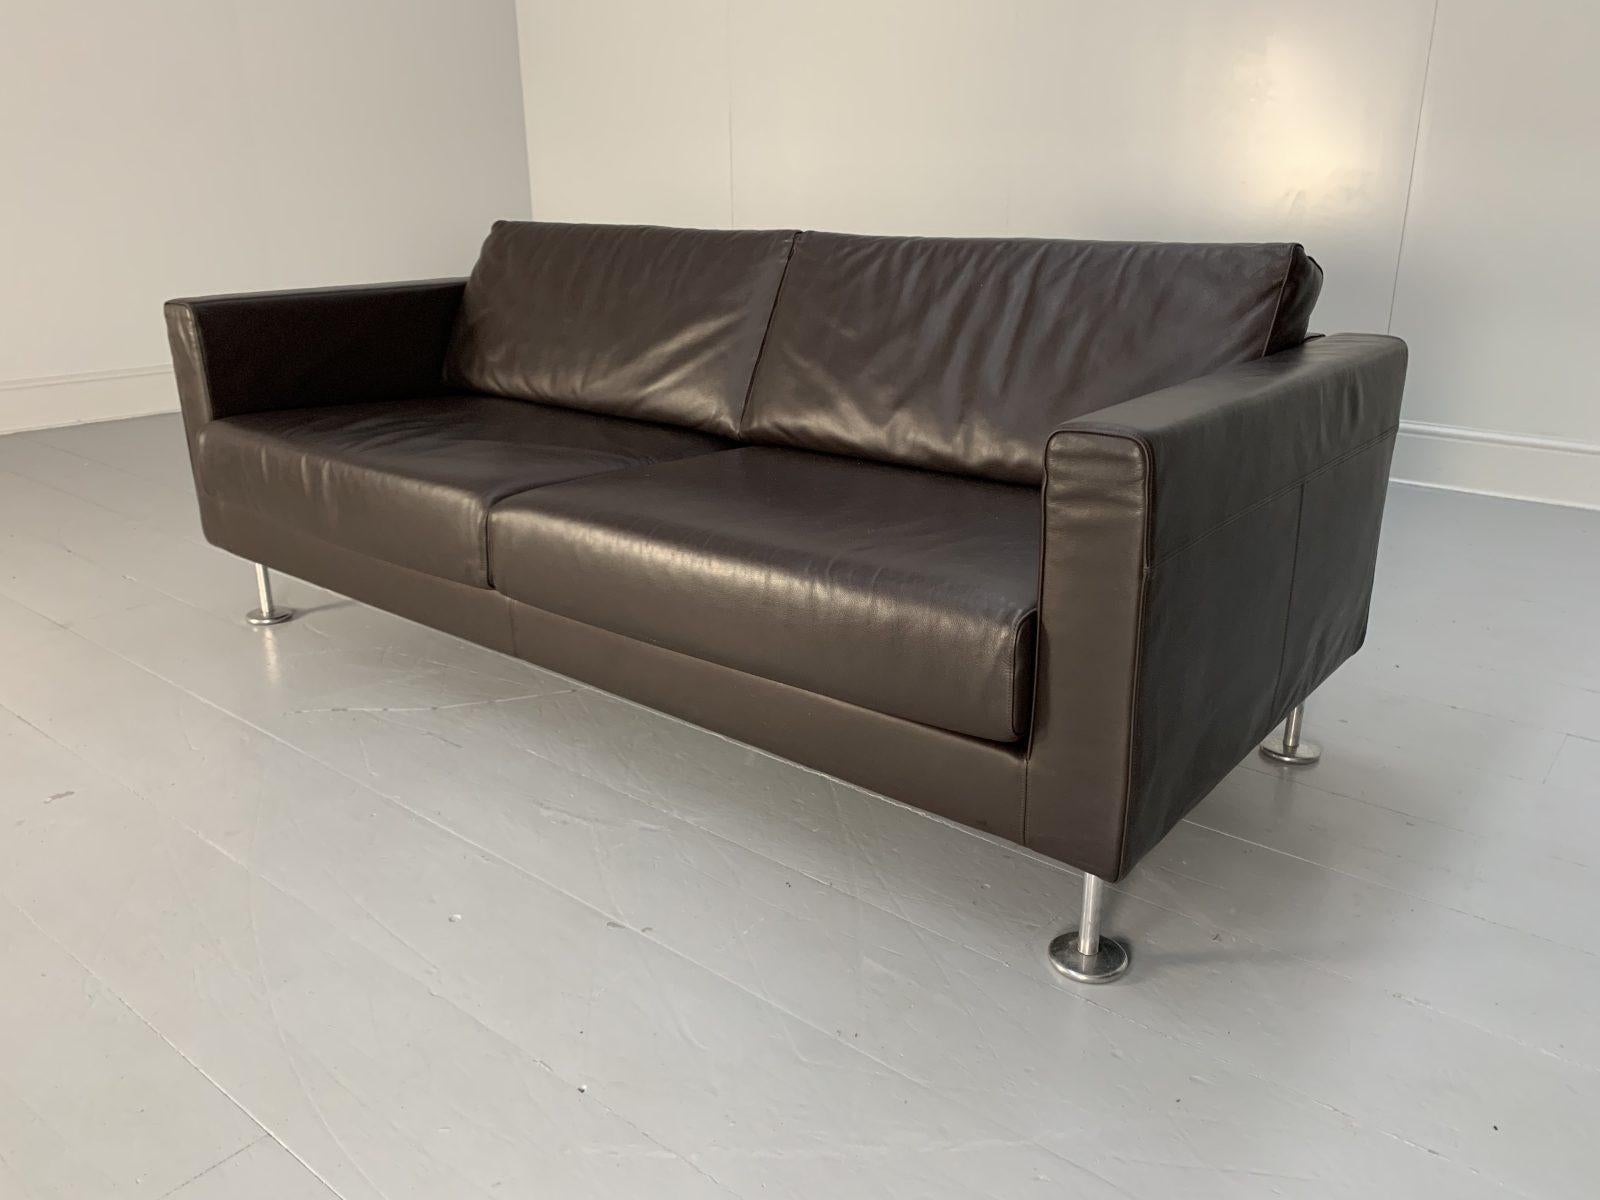 Hello Friends, and welcome to another unmissable offering from Lord Browns Furniture, the UK’s premier resource for fine Sofas and Chairs.

On offer on this occasion is an ultra-rare, superb “Park” 2-Seat Sofa, dressed in a peerless, high-grade